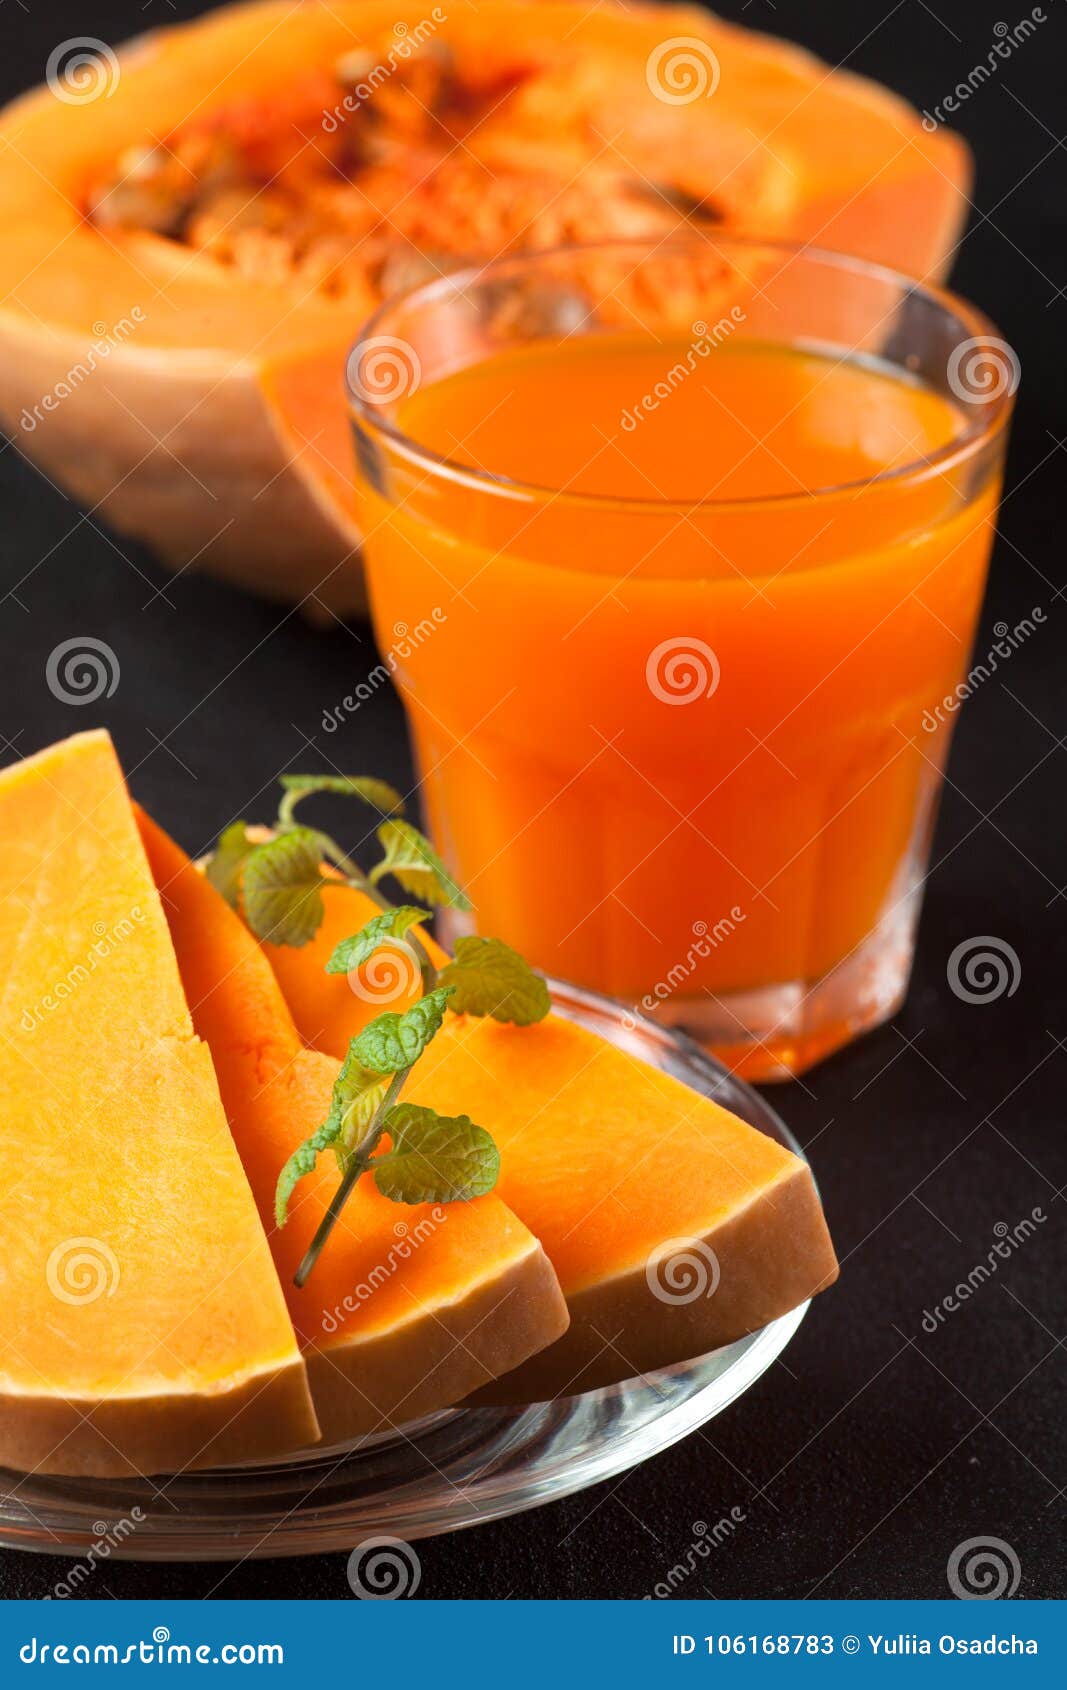 Pumpkin Fresh Juice In Beautiful Glasses And Jug With ...